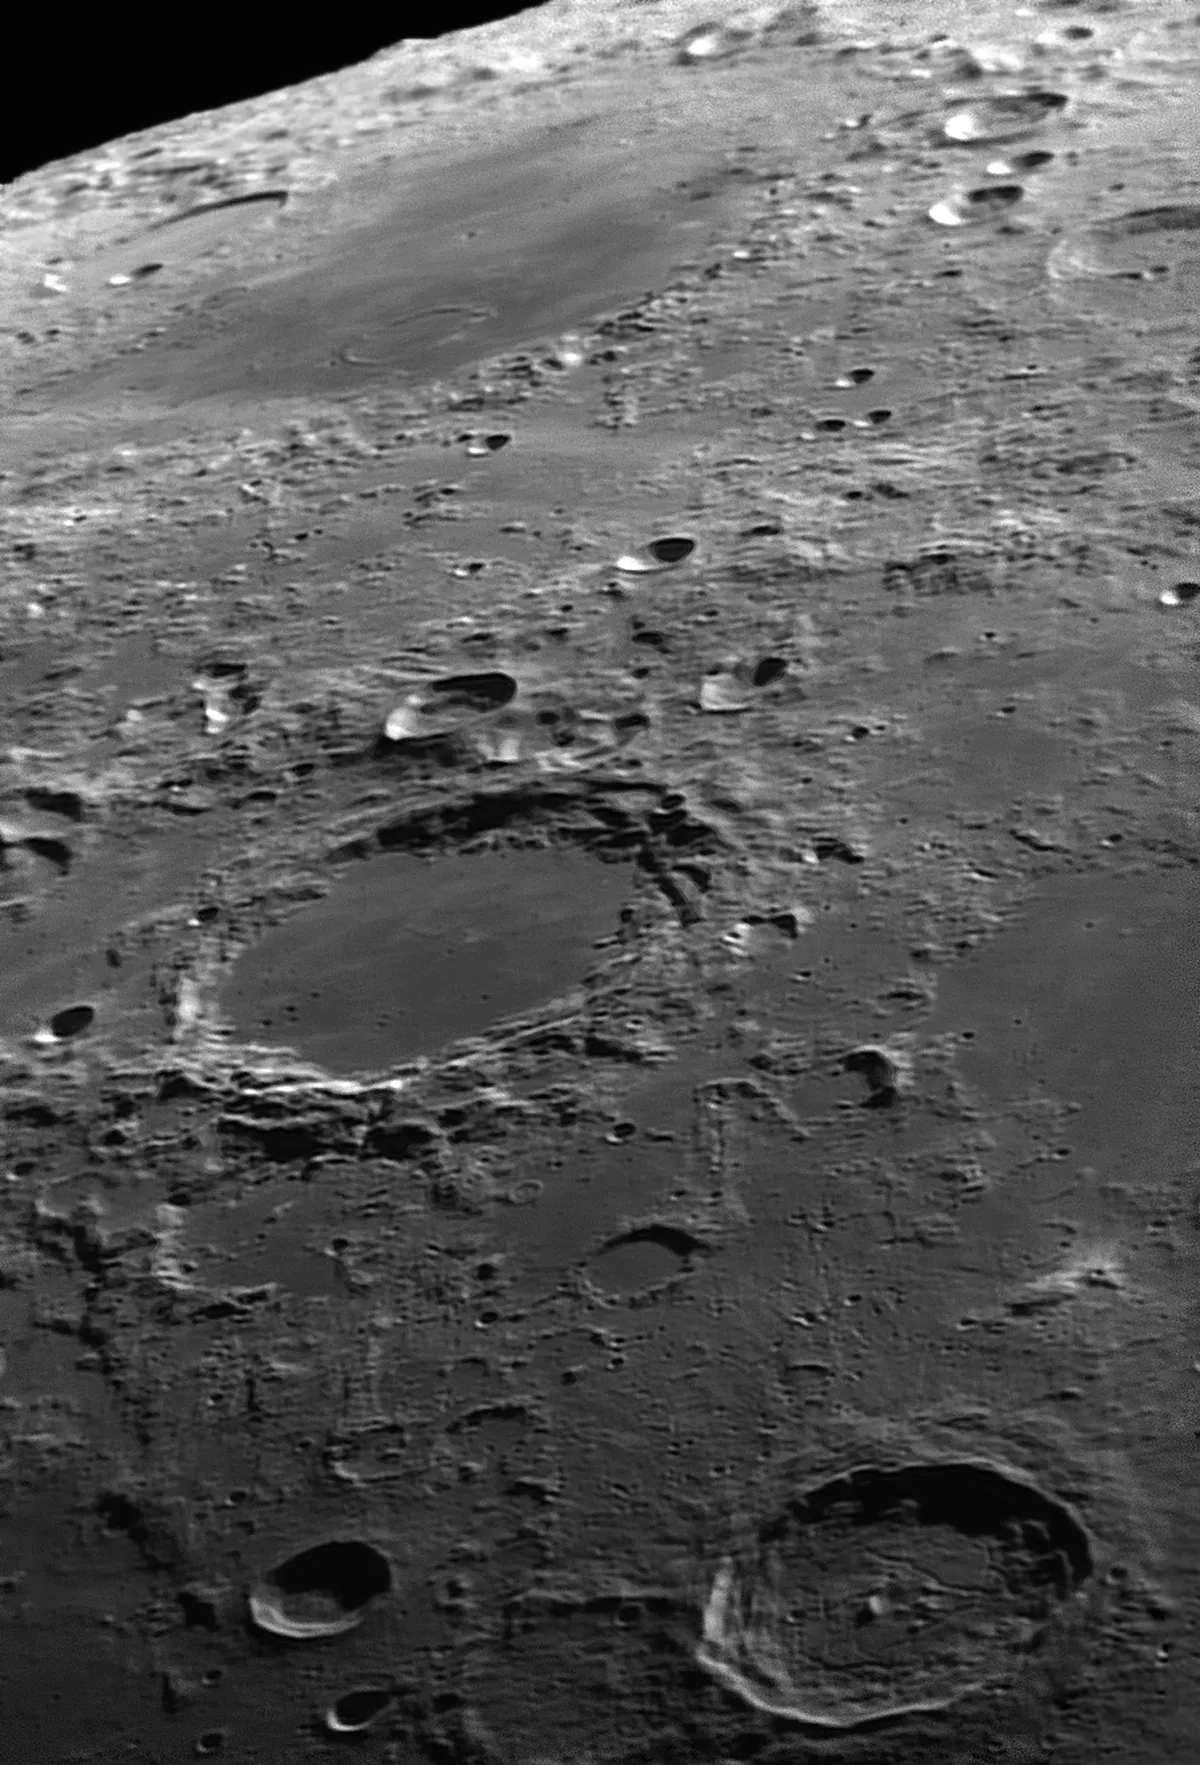 Endymion Crater and Surrounding Area by Chris Dignan, Oxfordshire, UK. Equipment: Celestron EdgeHD 8